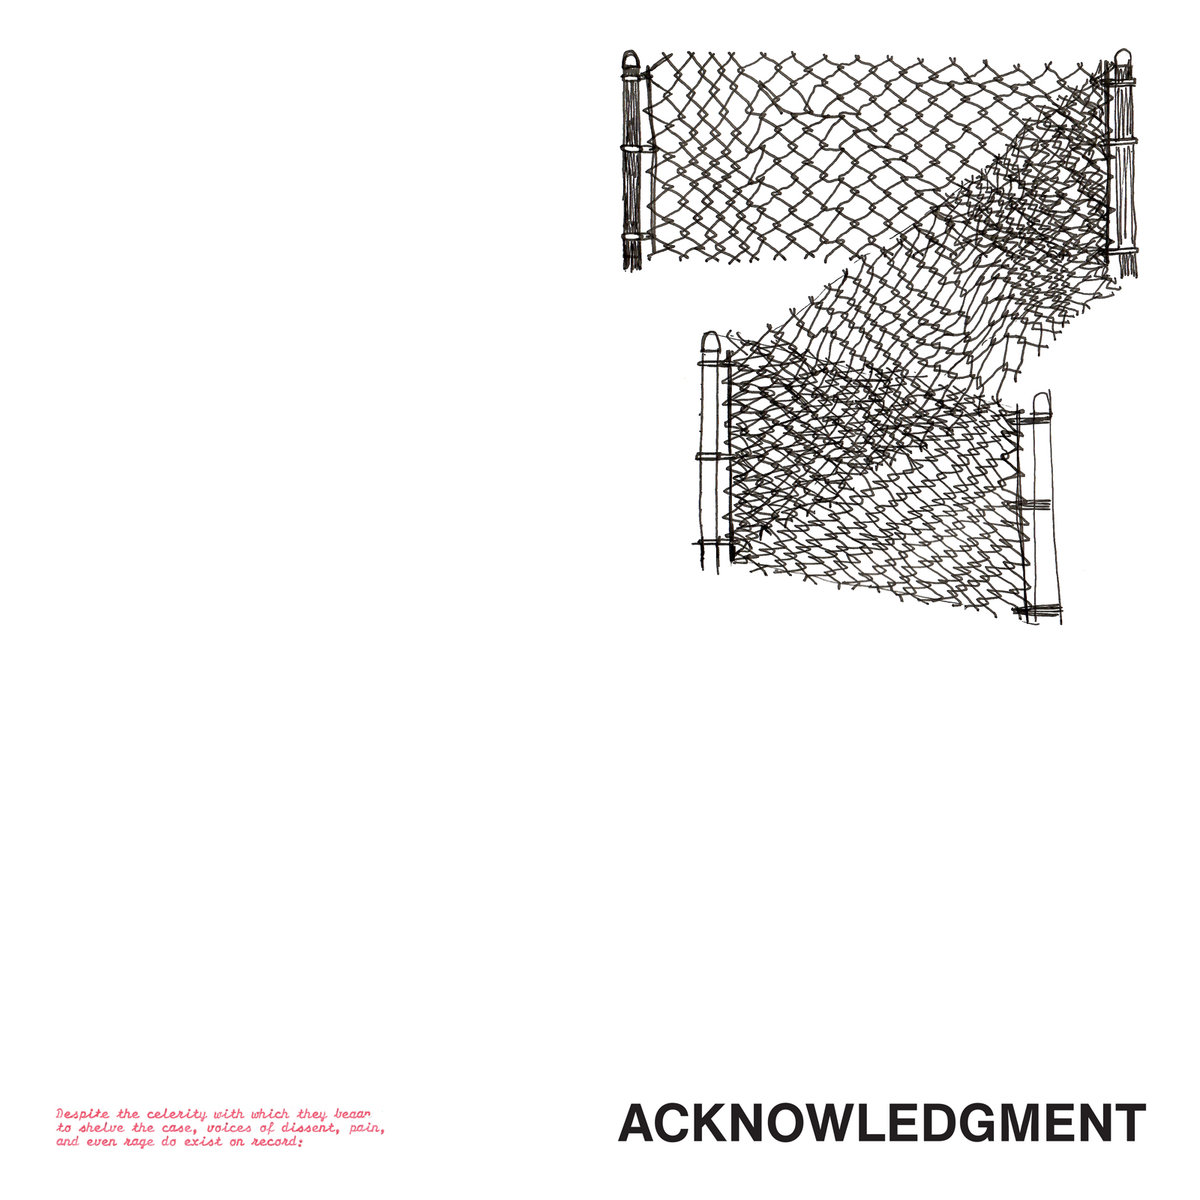 mark trecka Acknowledgment - pen illustration of a wire fence on a white background